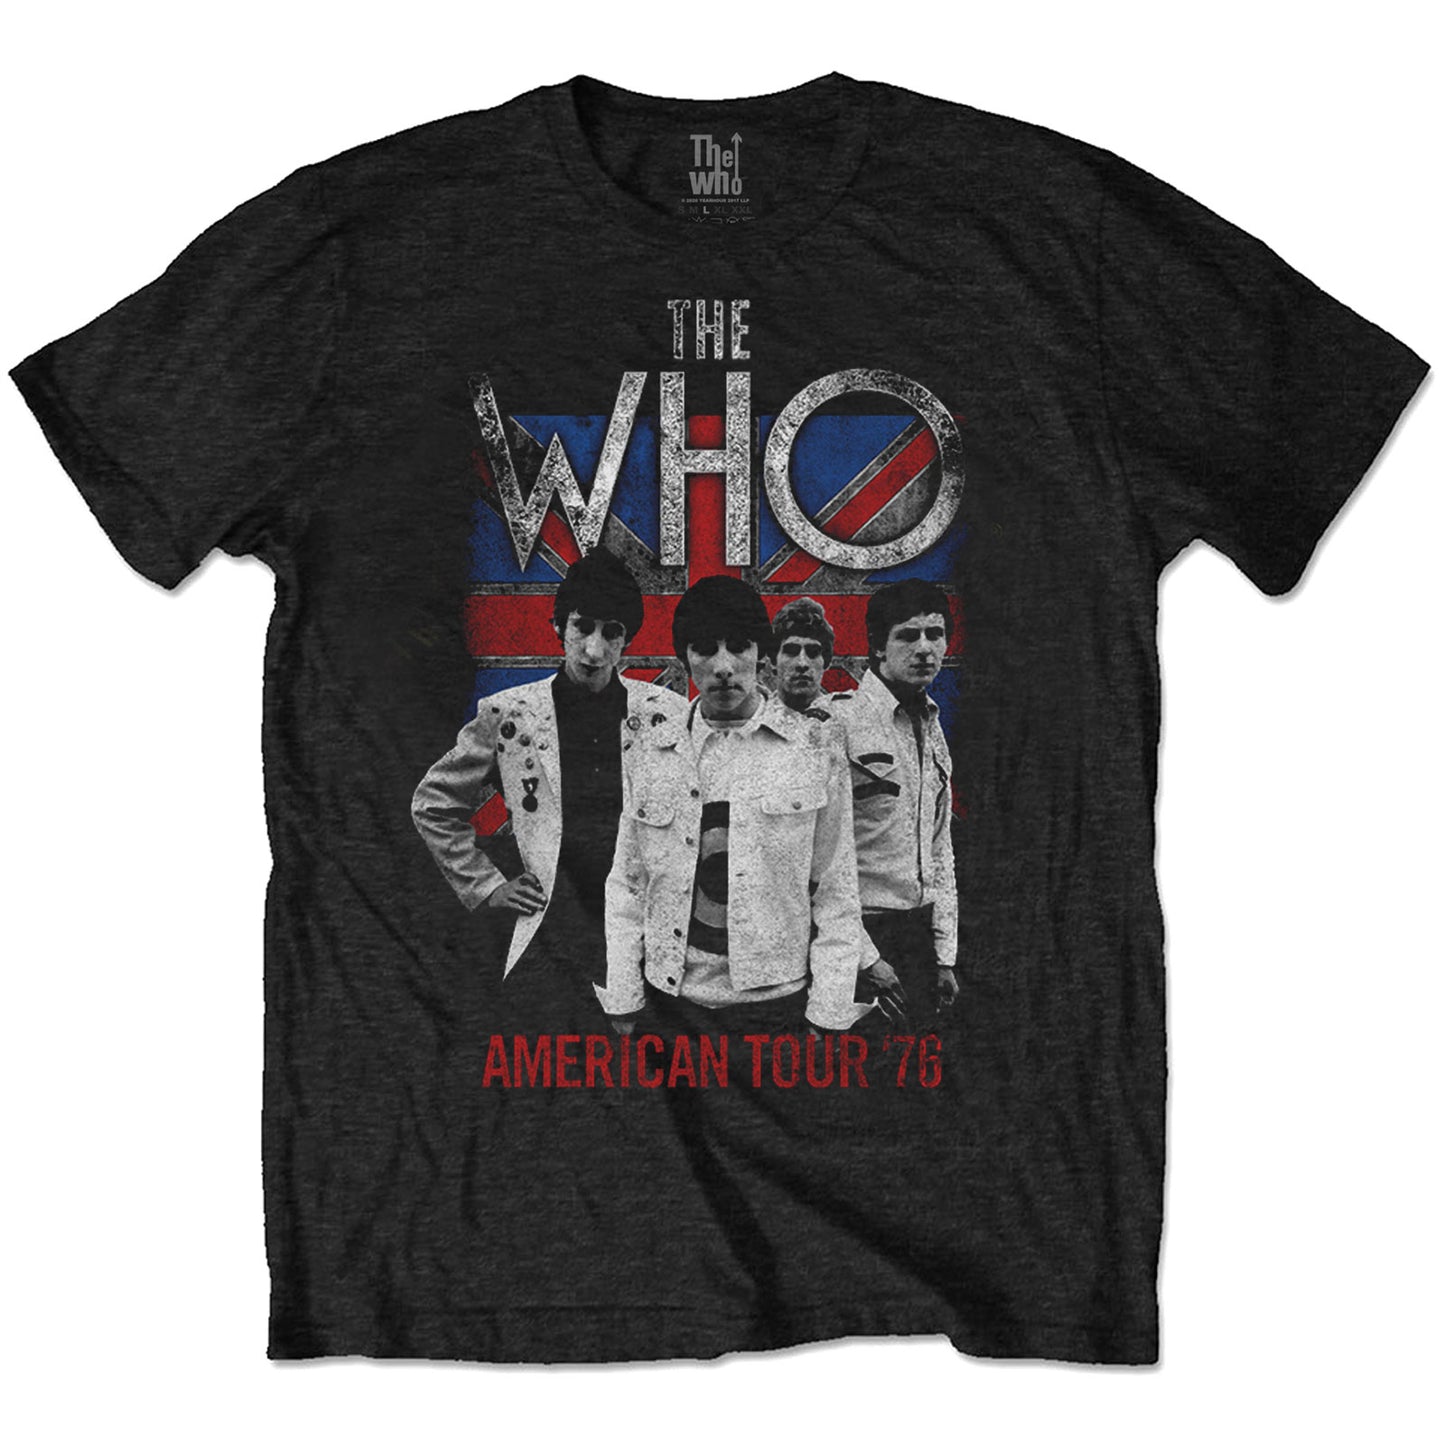 The Who T-Shirt: American Tour '79